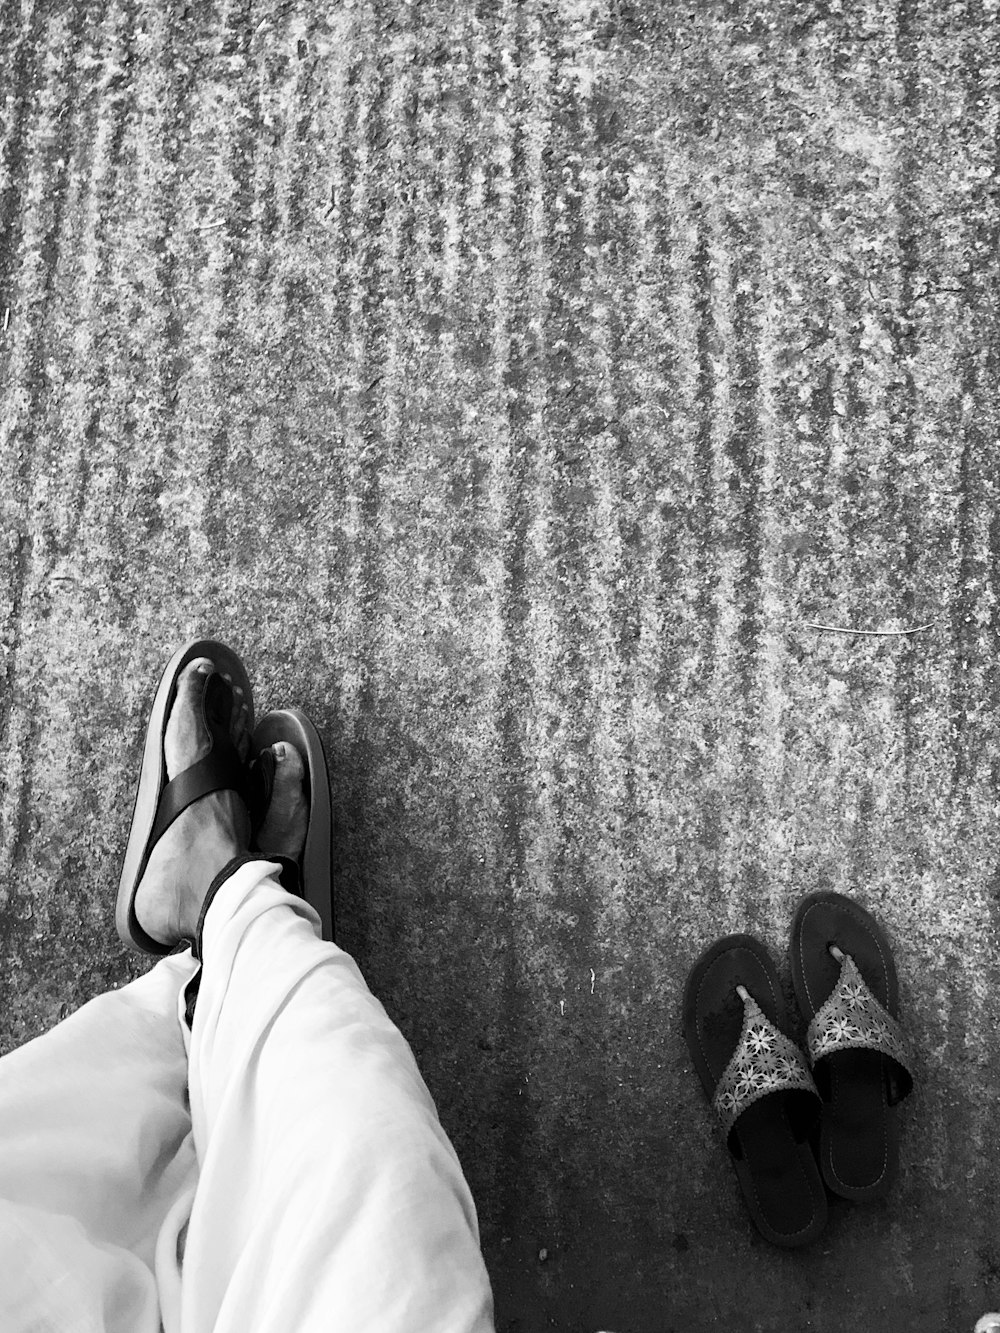 a black and white photo of a person wearing flip flops